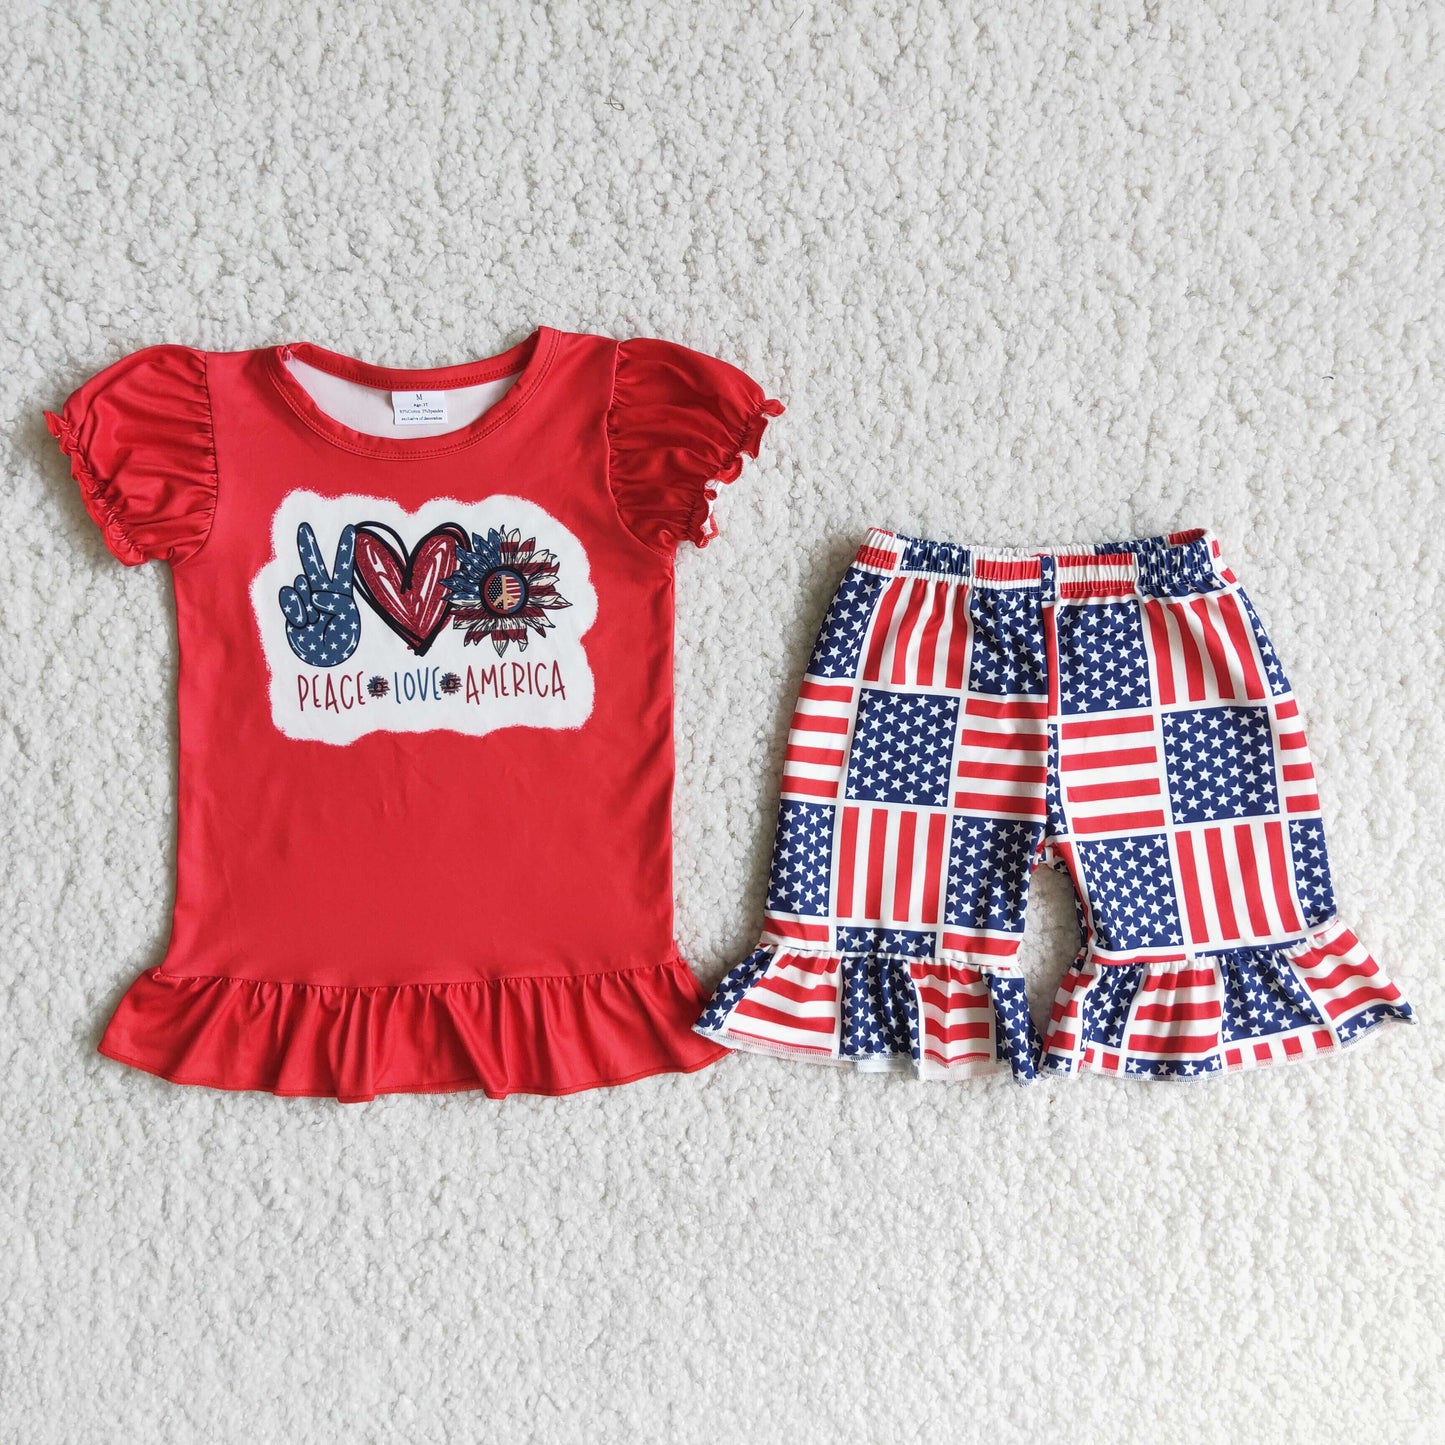 Girls  July 4th outfit